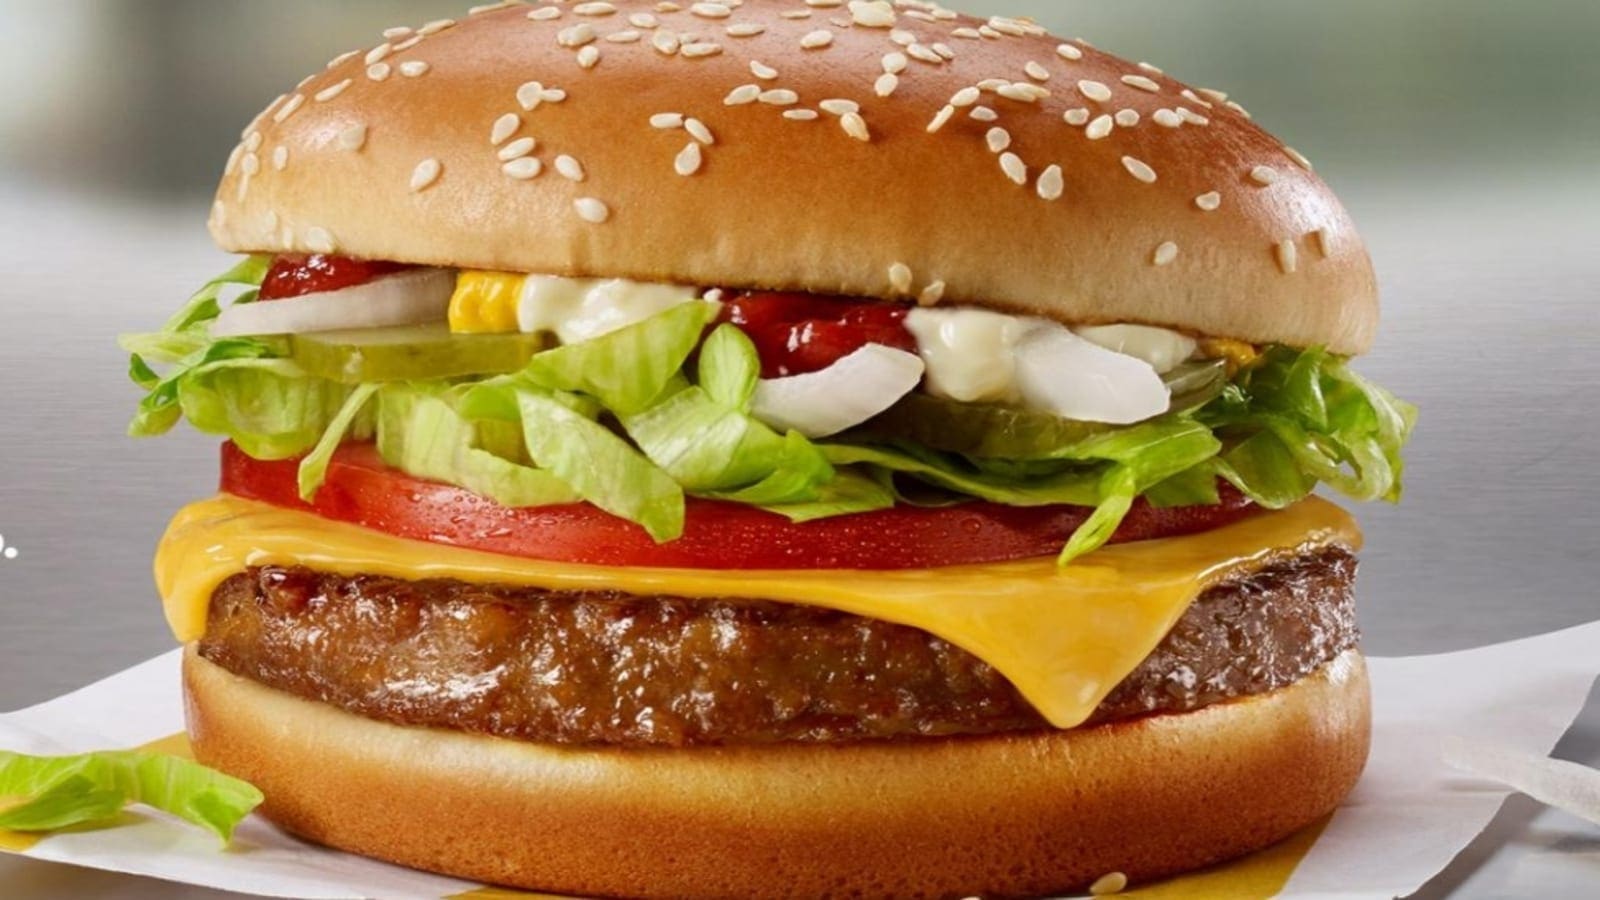 McDonald’s launches plant-based burger to appeal to health-conscious consumers